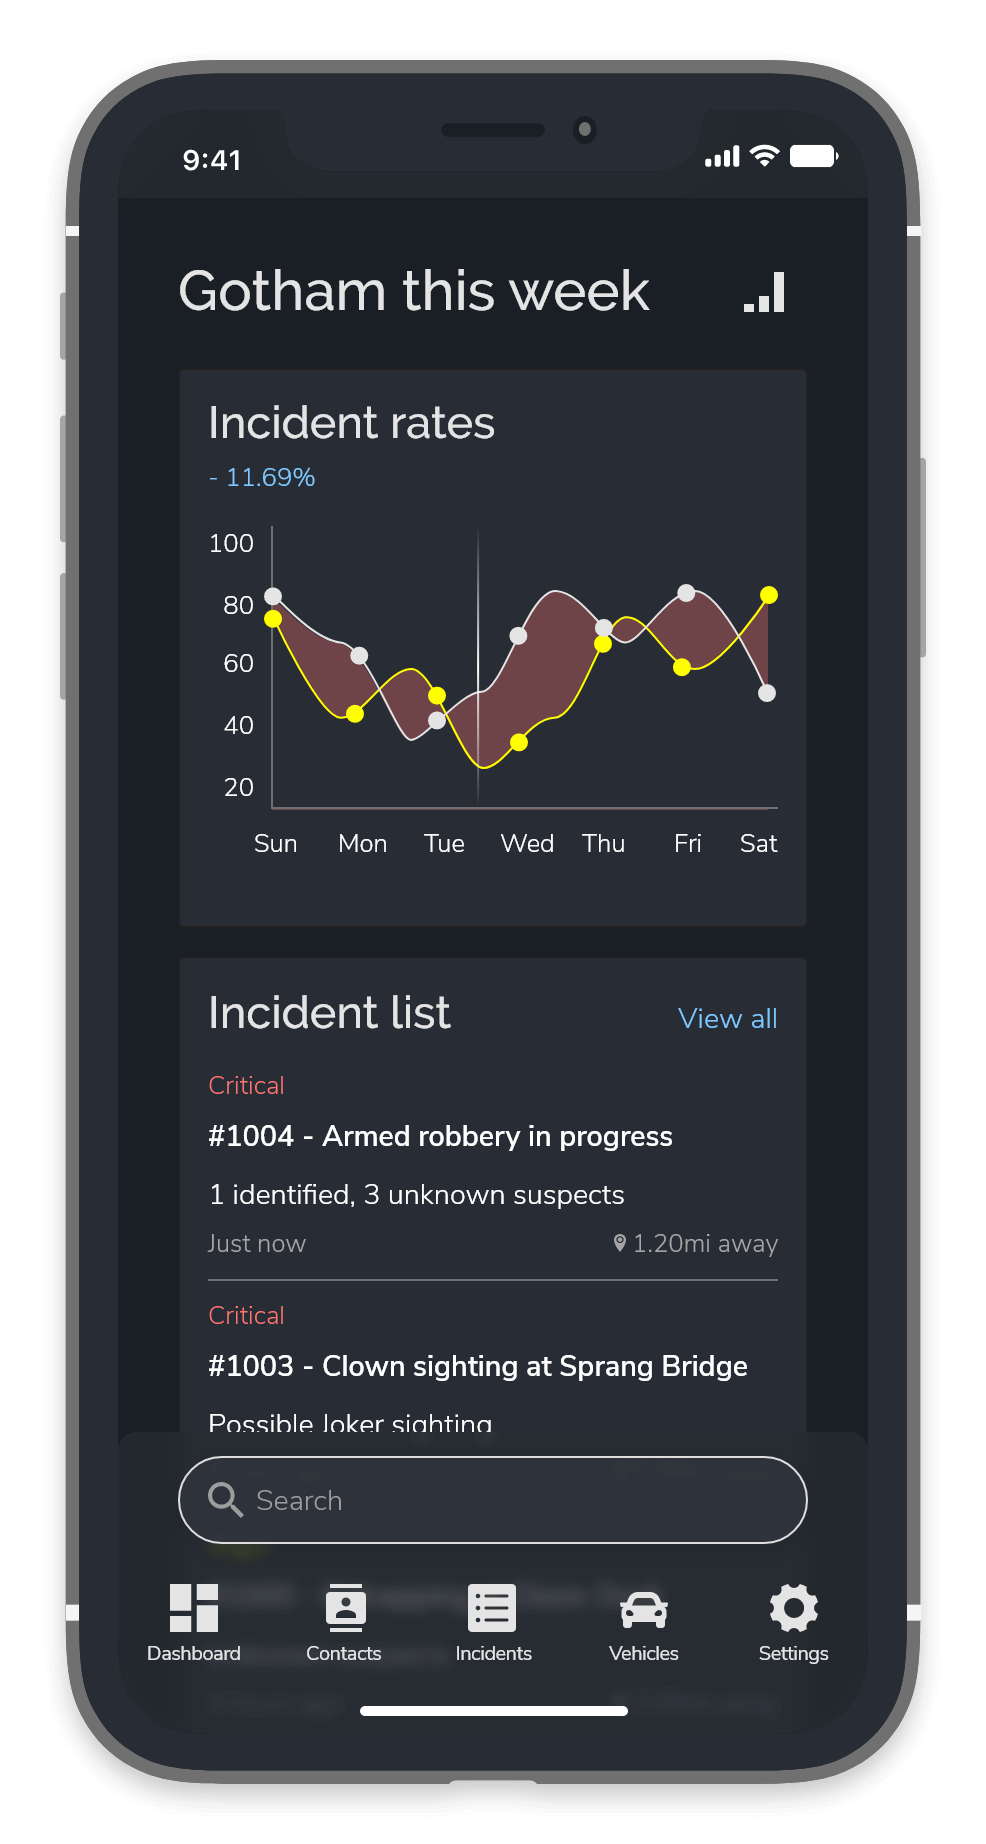 A screenshot of the dashboard showing the numer of incidents that have been recorded